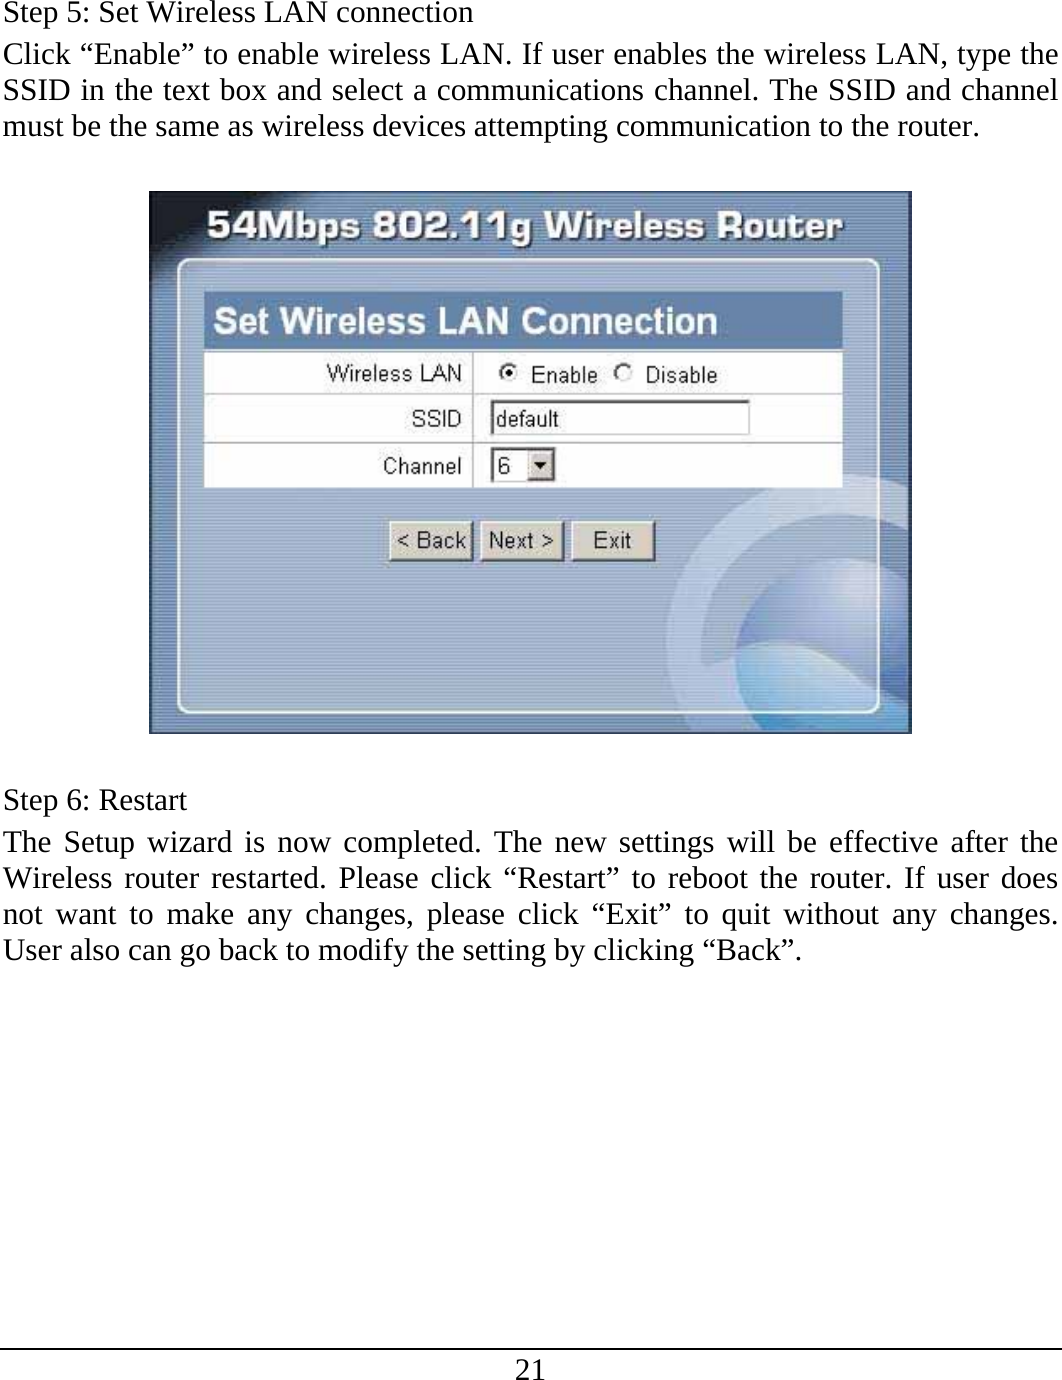 21   Step 5: Set Wireless LAN connection Click “Enable” to enable wireless LAN. If user enables the wireless LAN, type the SSID in the text box and select a communications channel. The SSID and channel must be the same as wireless devices attempting communication to the router.    Step 6: Restart The Setup wizard is now completed. The new settings will be effective after the Wireless router restarted. Please click “Restart” to reboot the router. If user does not want to make any changes, please click “Exit” to quit without any changes. User also can go back to modify the setting by clicking “Back”. 